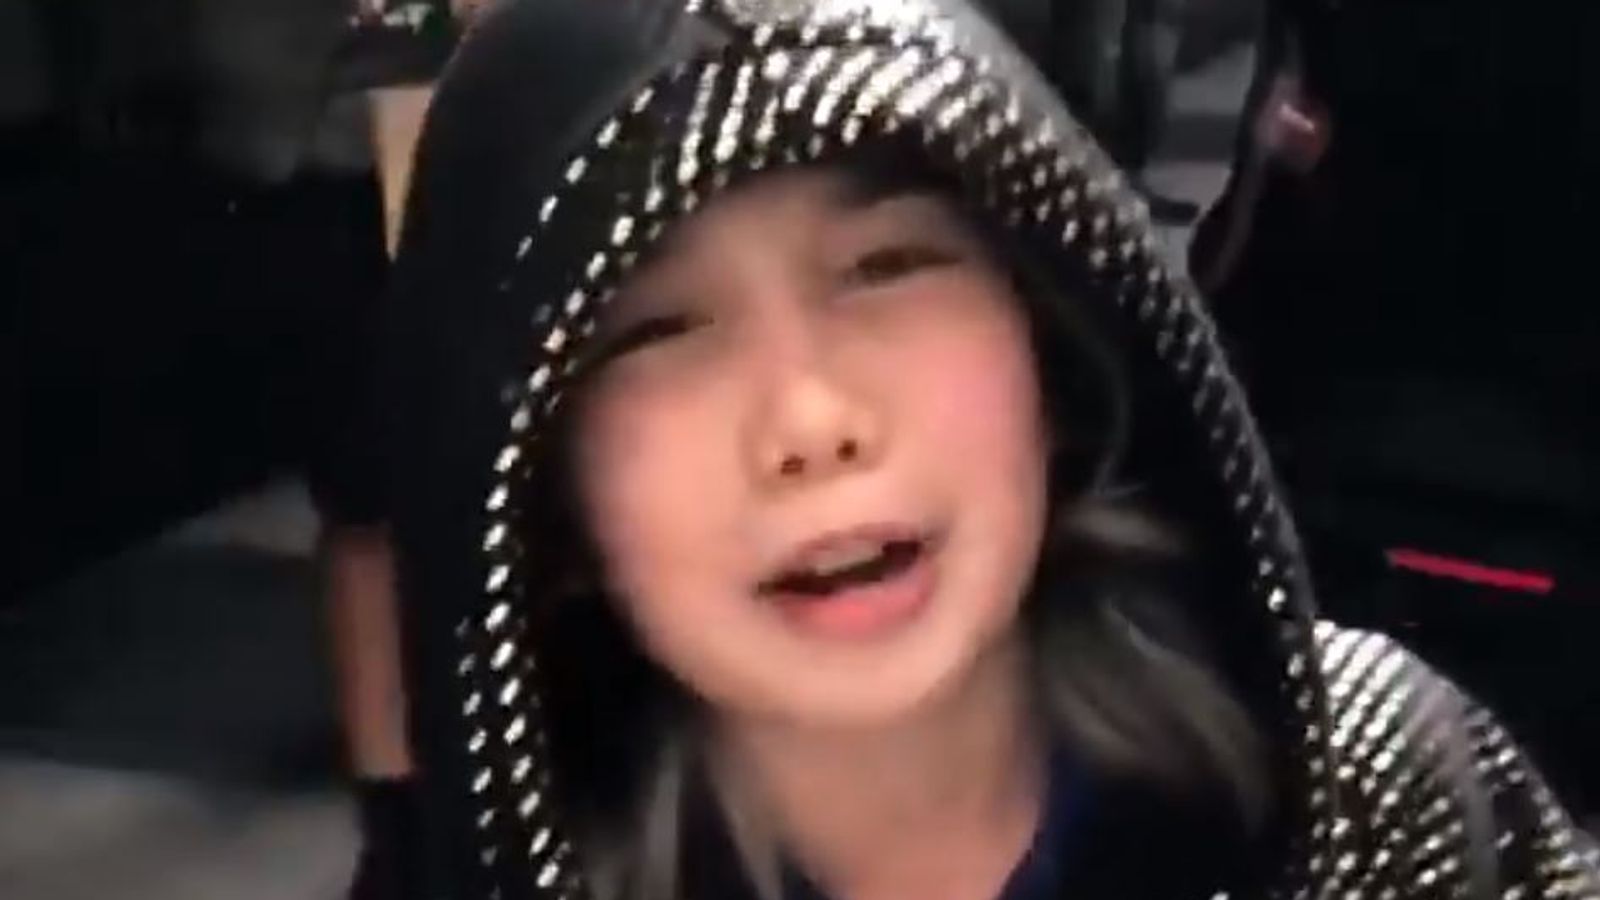 Lil Tay Child rapper says she and her brother are safe and alive after